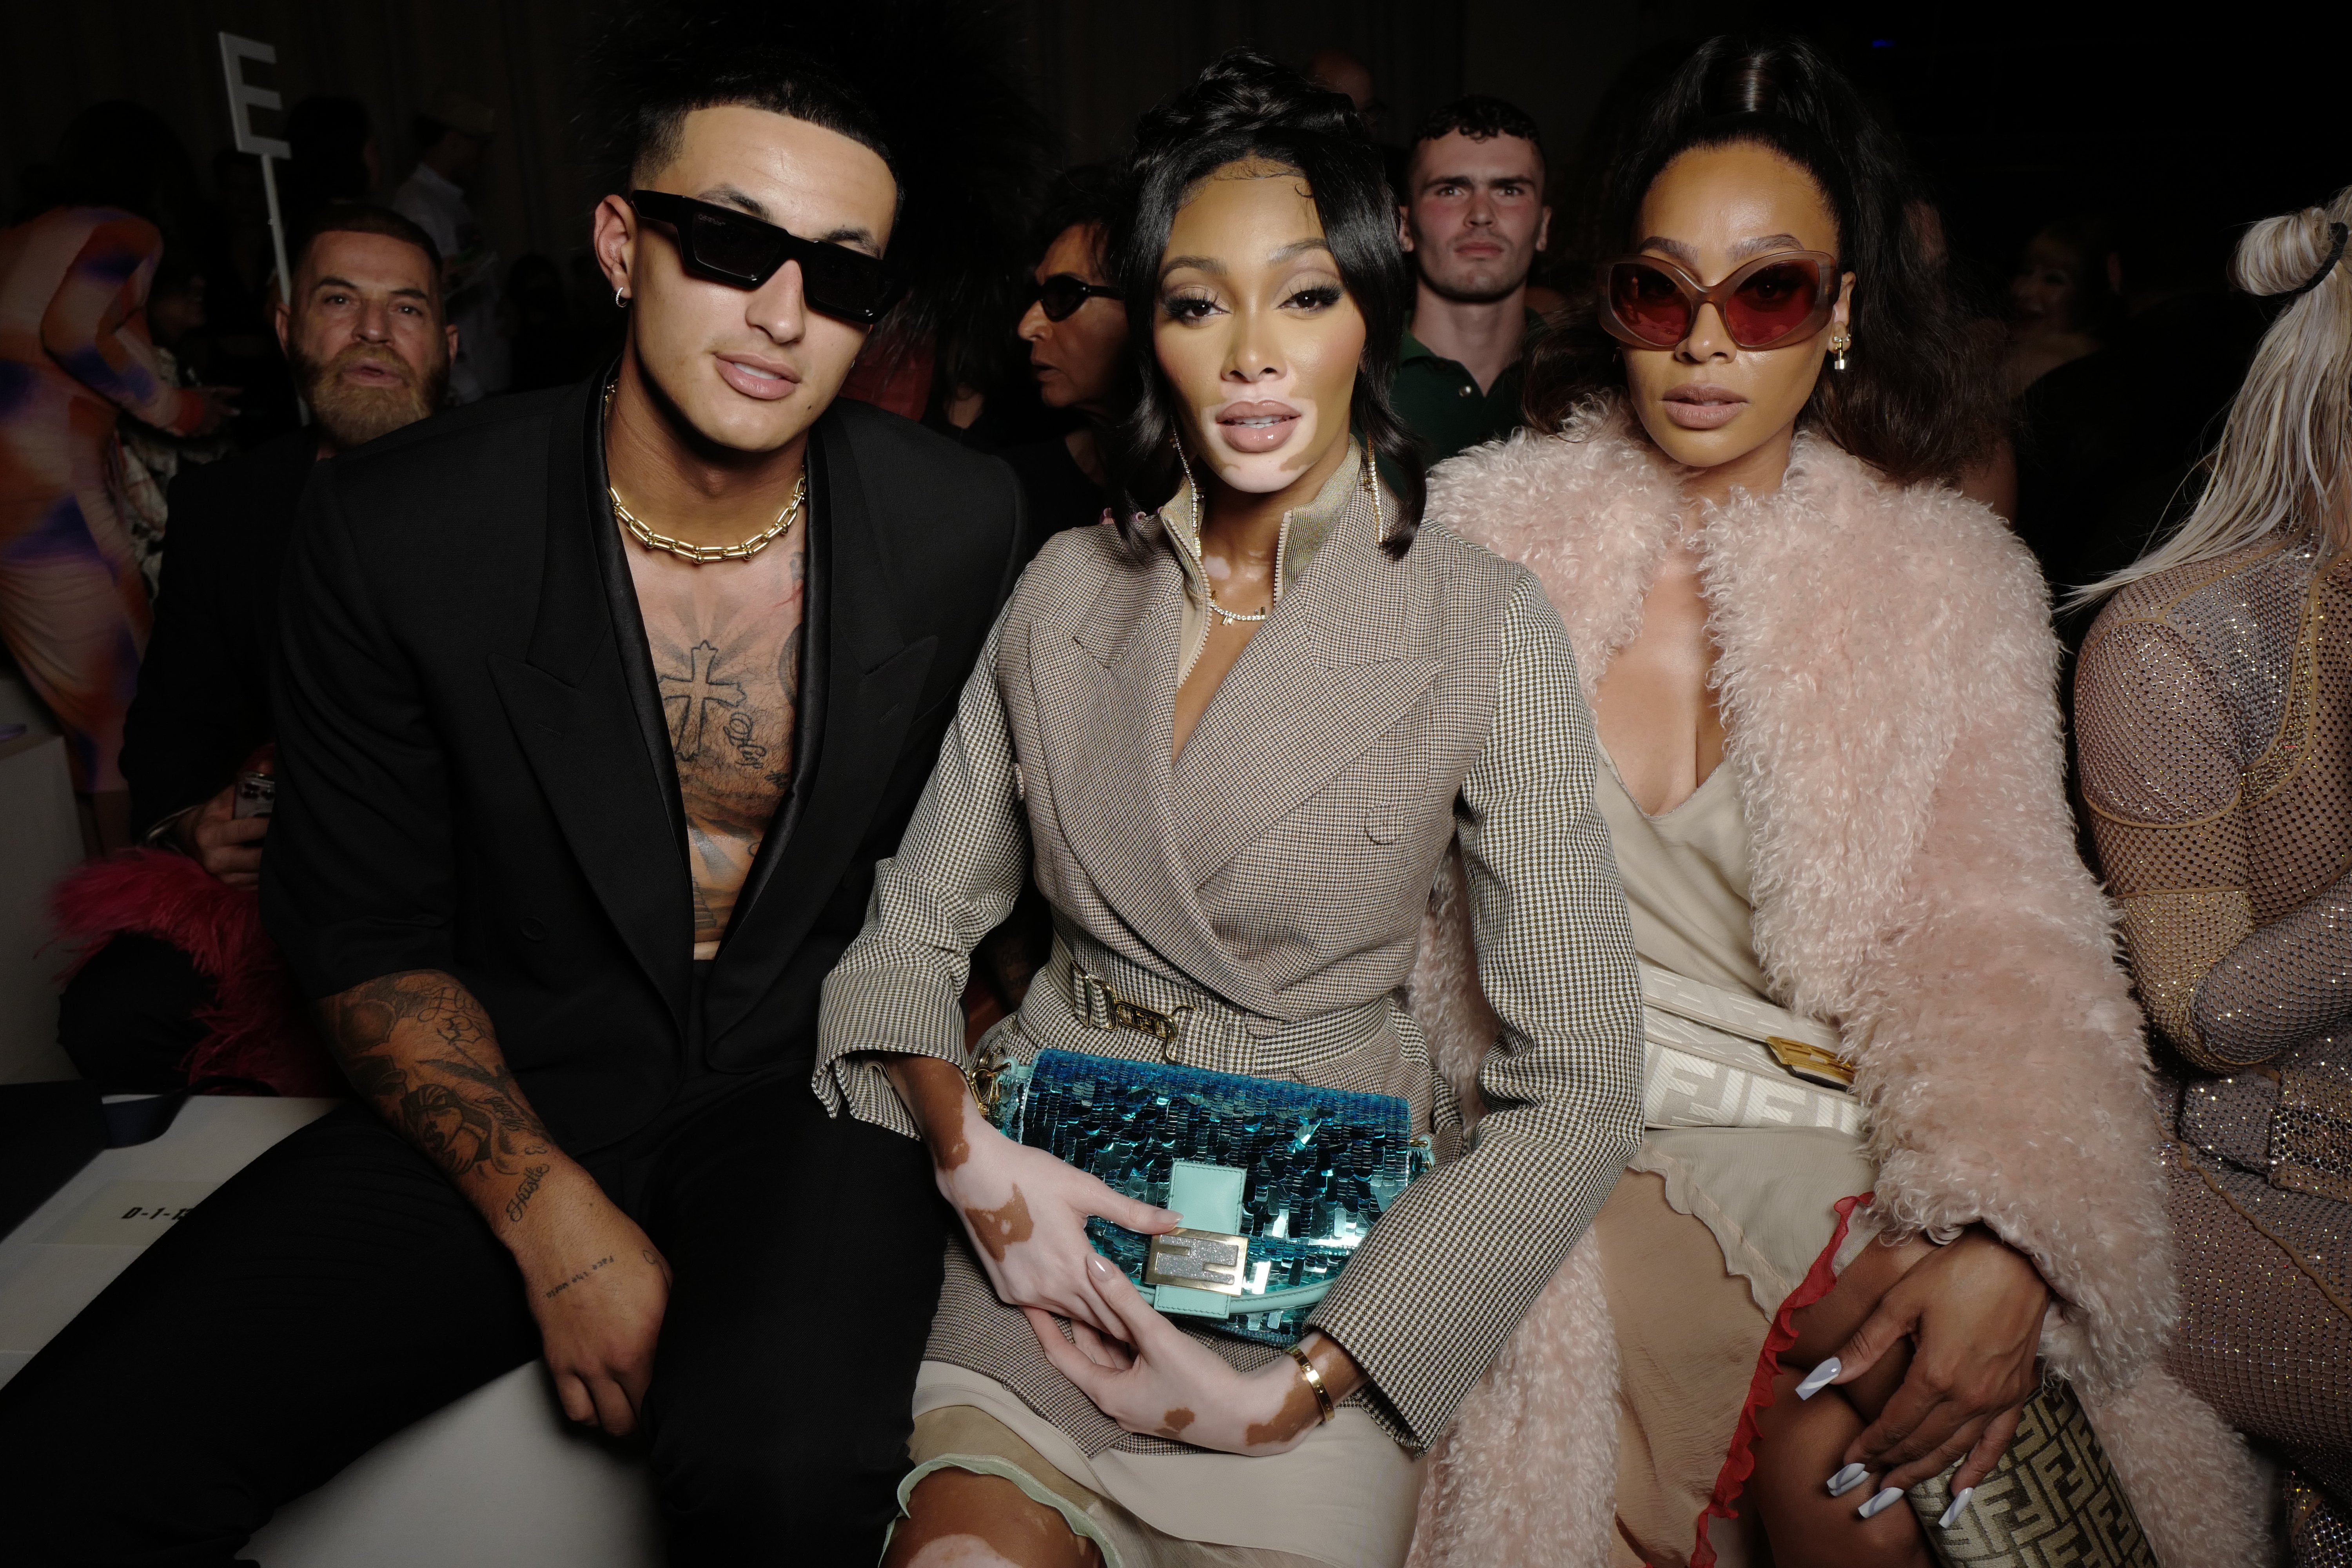 Kyle Kuzma, Winnie Harlow, Lala Anthony at the Front Row of the Fendi Spring 2023 fashion show at the Hammerstein Ballroom on September 9, 2022, in New York City, New York. | Source:  Getty Images